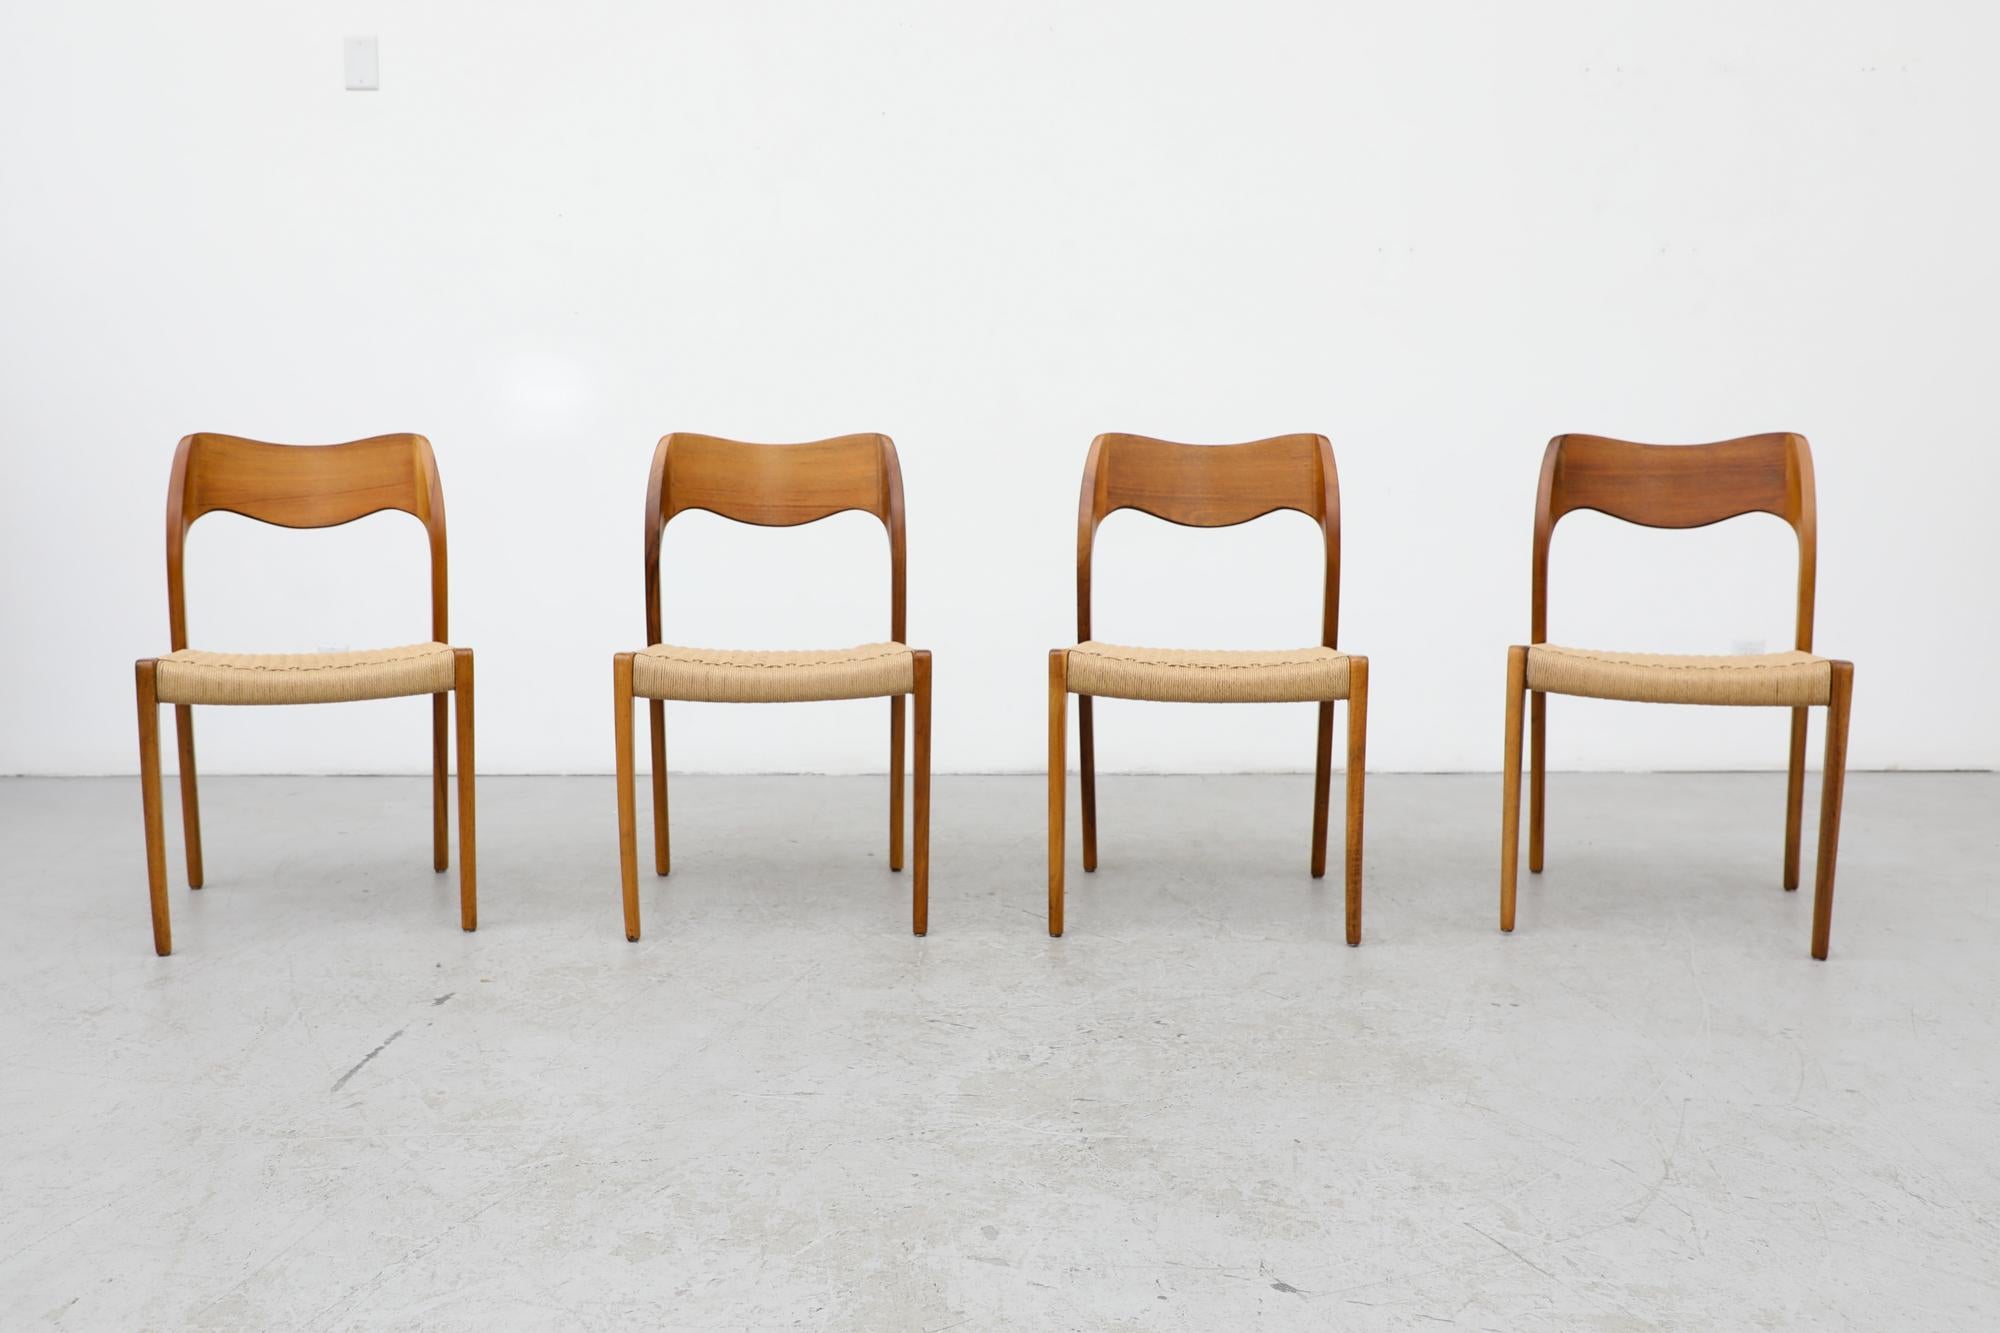 Set of 4 mid-century model 71 dining chairs with paper cord seating, designed by Niels Moller for J. L. Møllers Møbelfabrik. Originally designed in 1951. In original condition with visible wear consistent with their age and use.